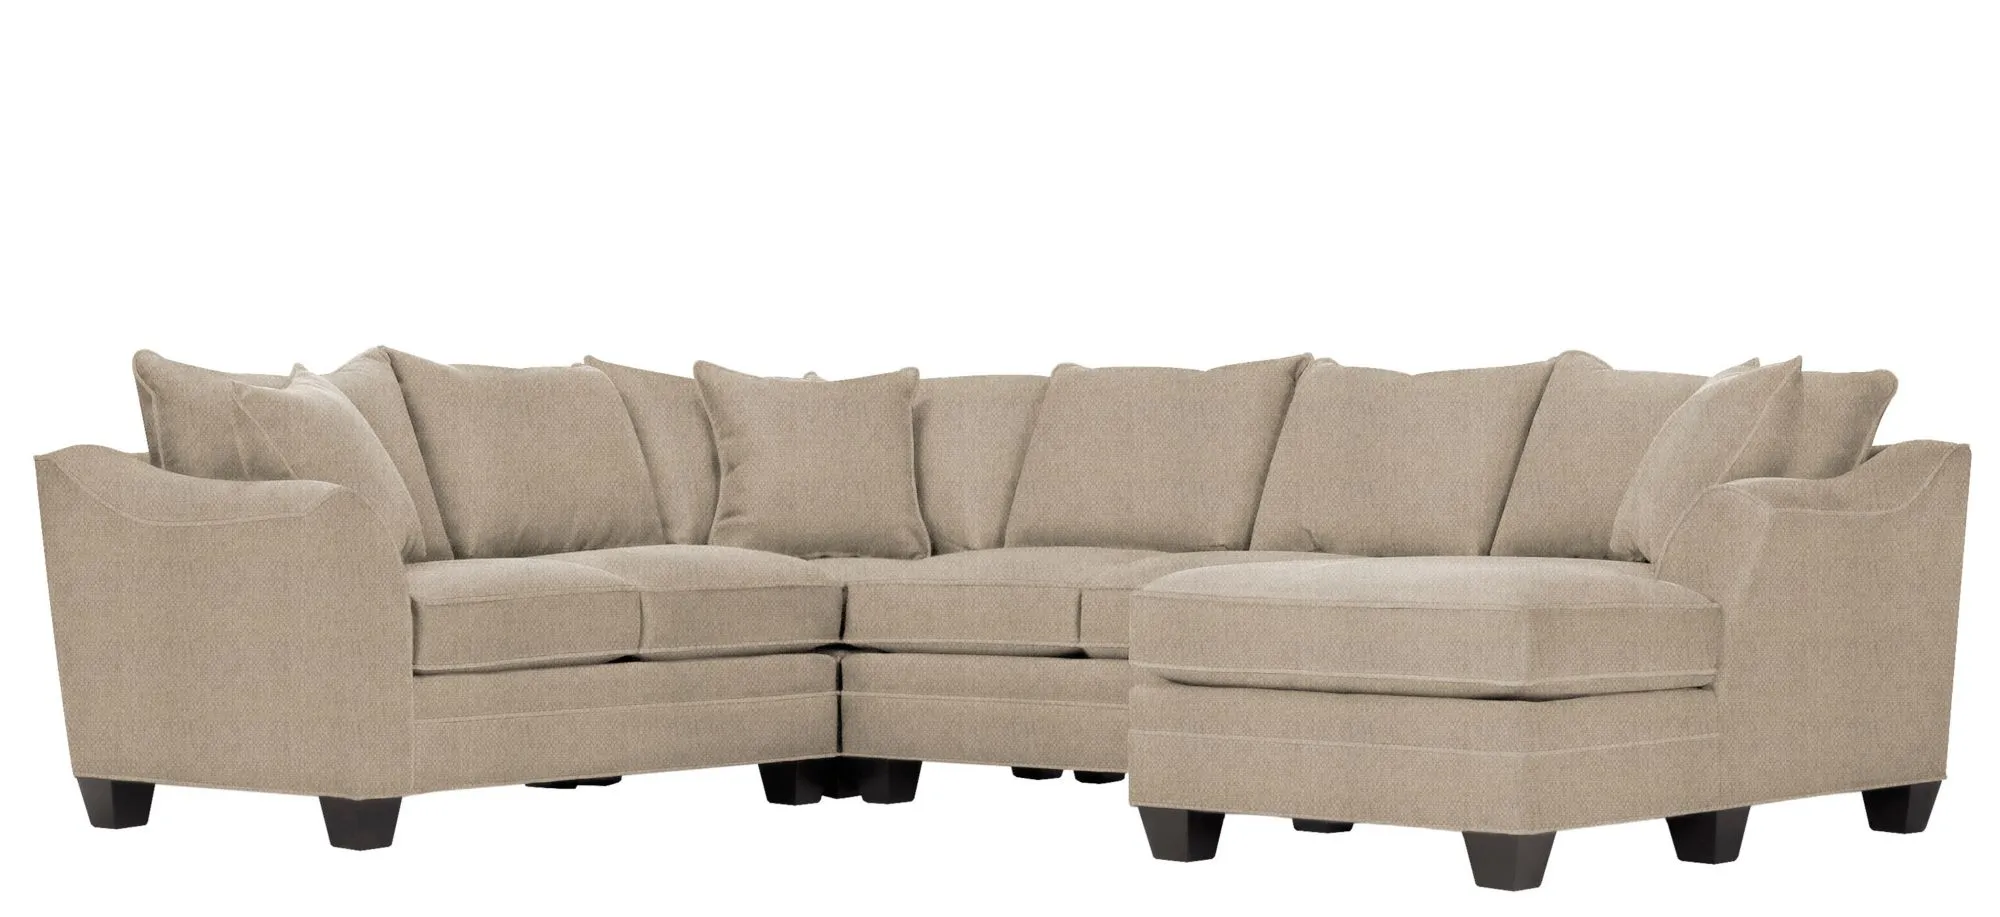 Foresthill 4-pc. Sectional w/ Right Arm Facing Chaise in Sugar Shack Putty by H.M. Richards